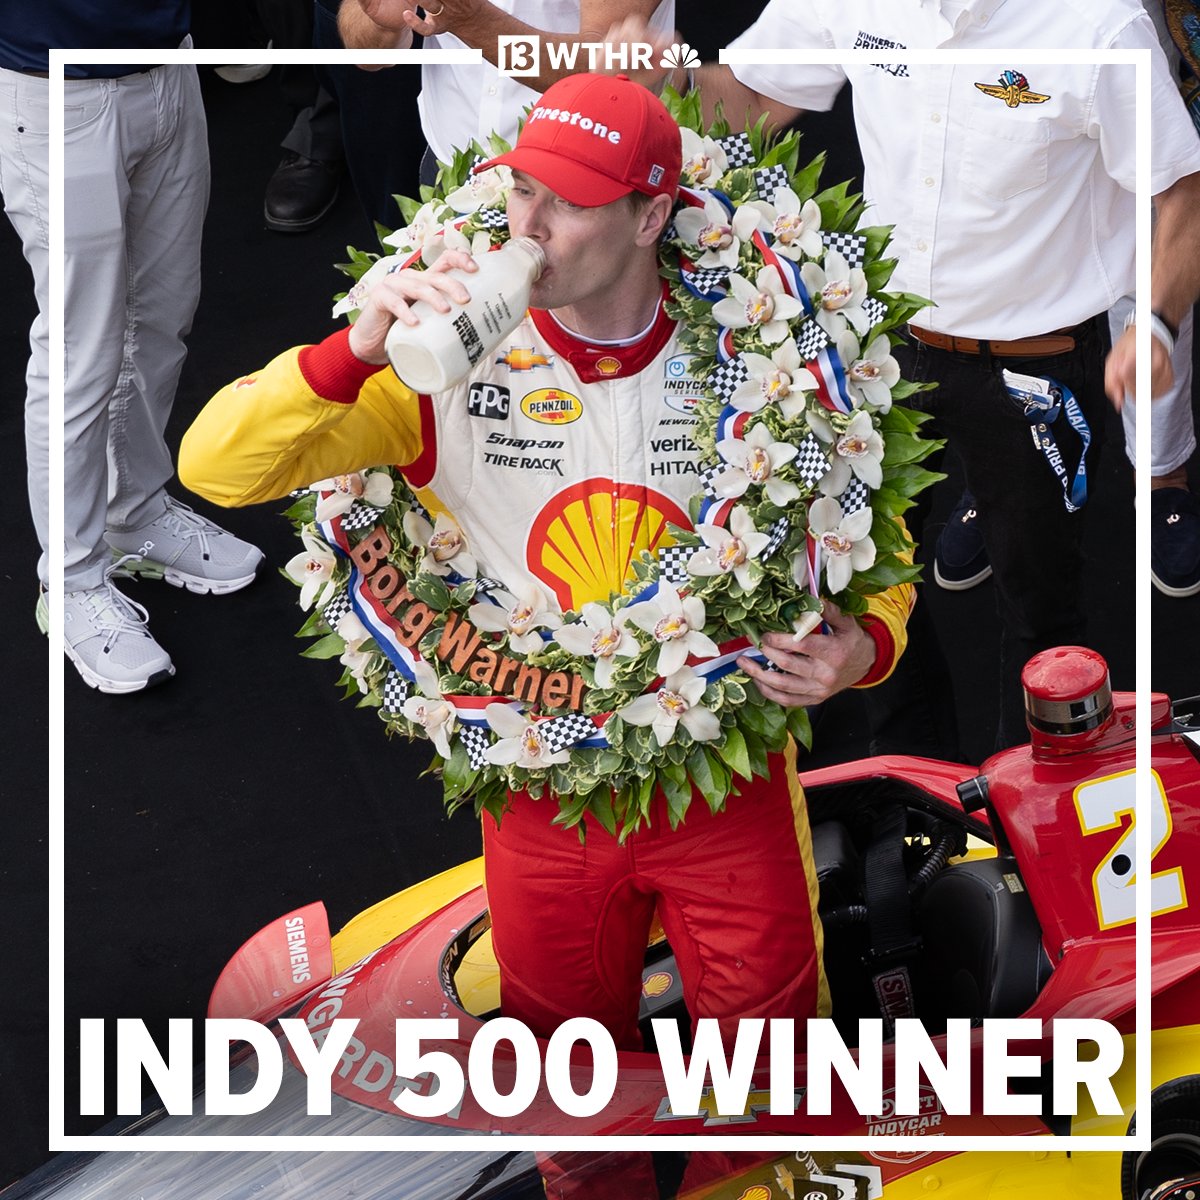 BACK-TO-BACK! 🏆🏆Josef Newgarden became the first driver in 22 years to win the Indy 500 in consecutive years! 🏁